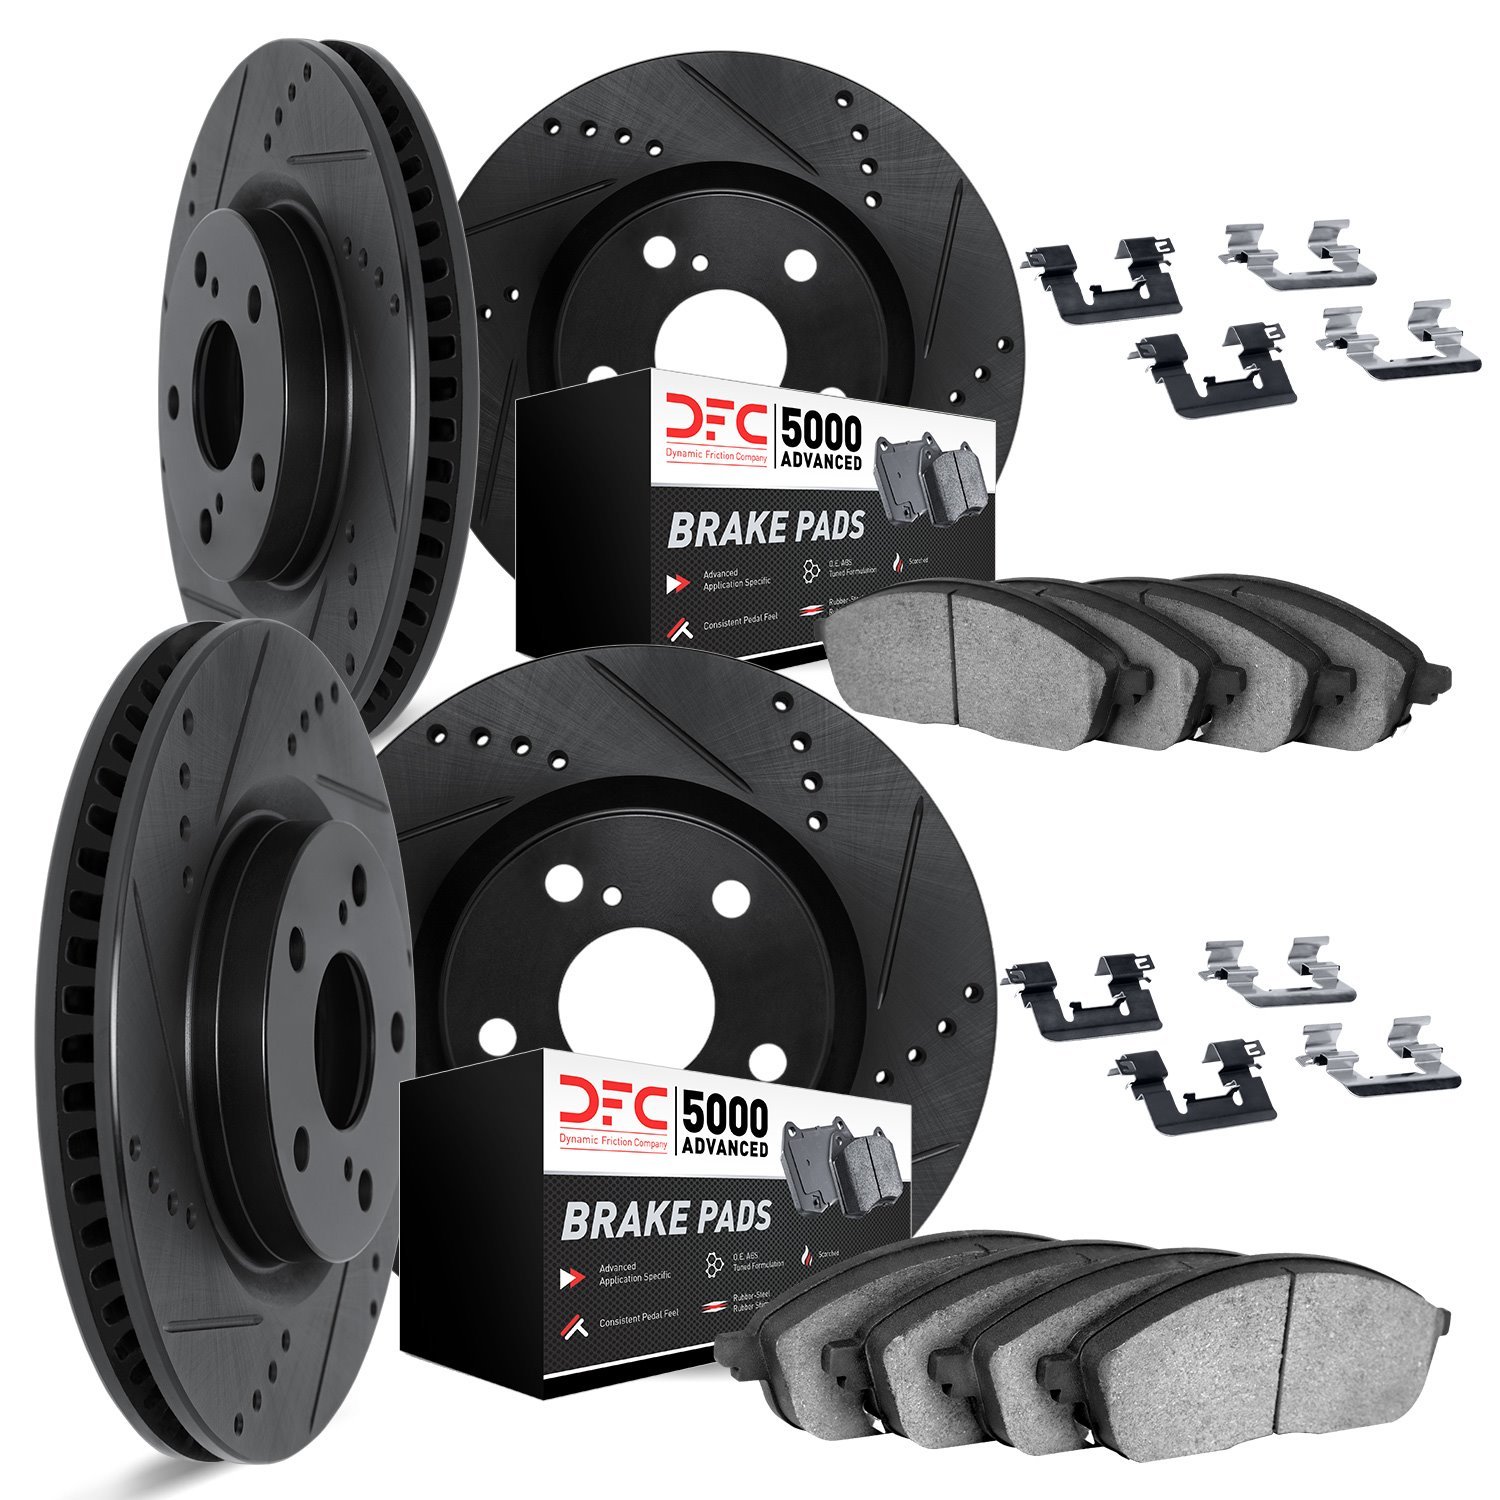 8514-31087 Drilled/Slotted Brake Rotors w/5000 Advanced Brake Pads Kit & Hardware [Black], 2006-2008 BMW, Position: Front and Re